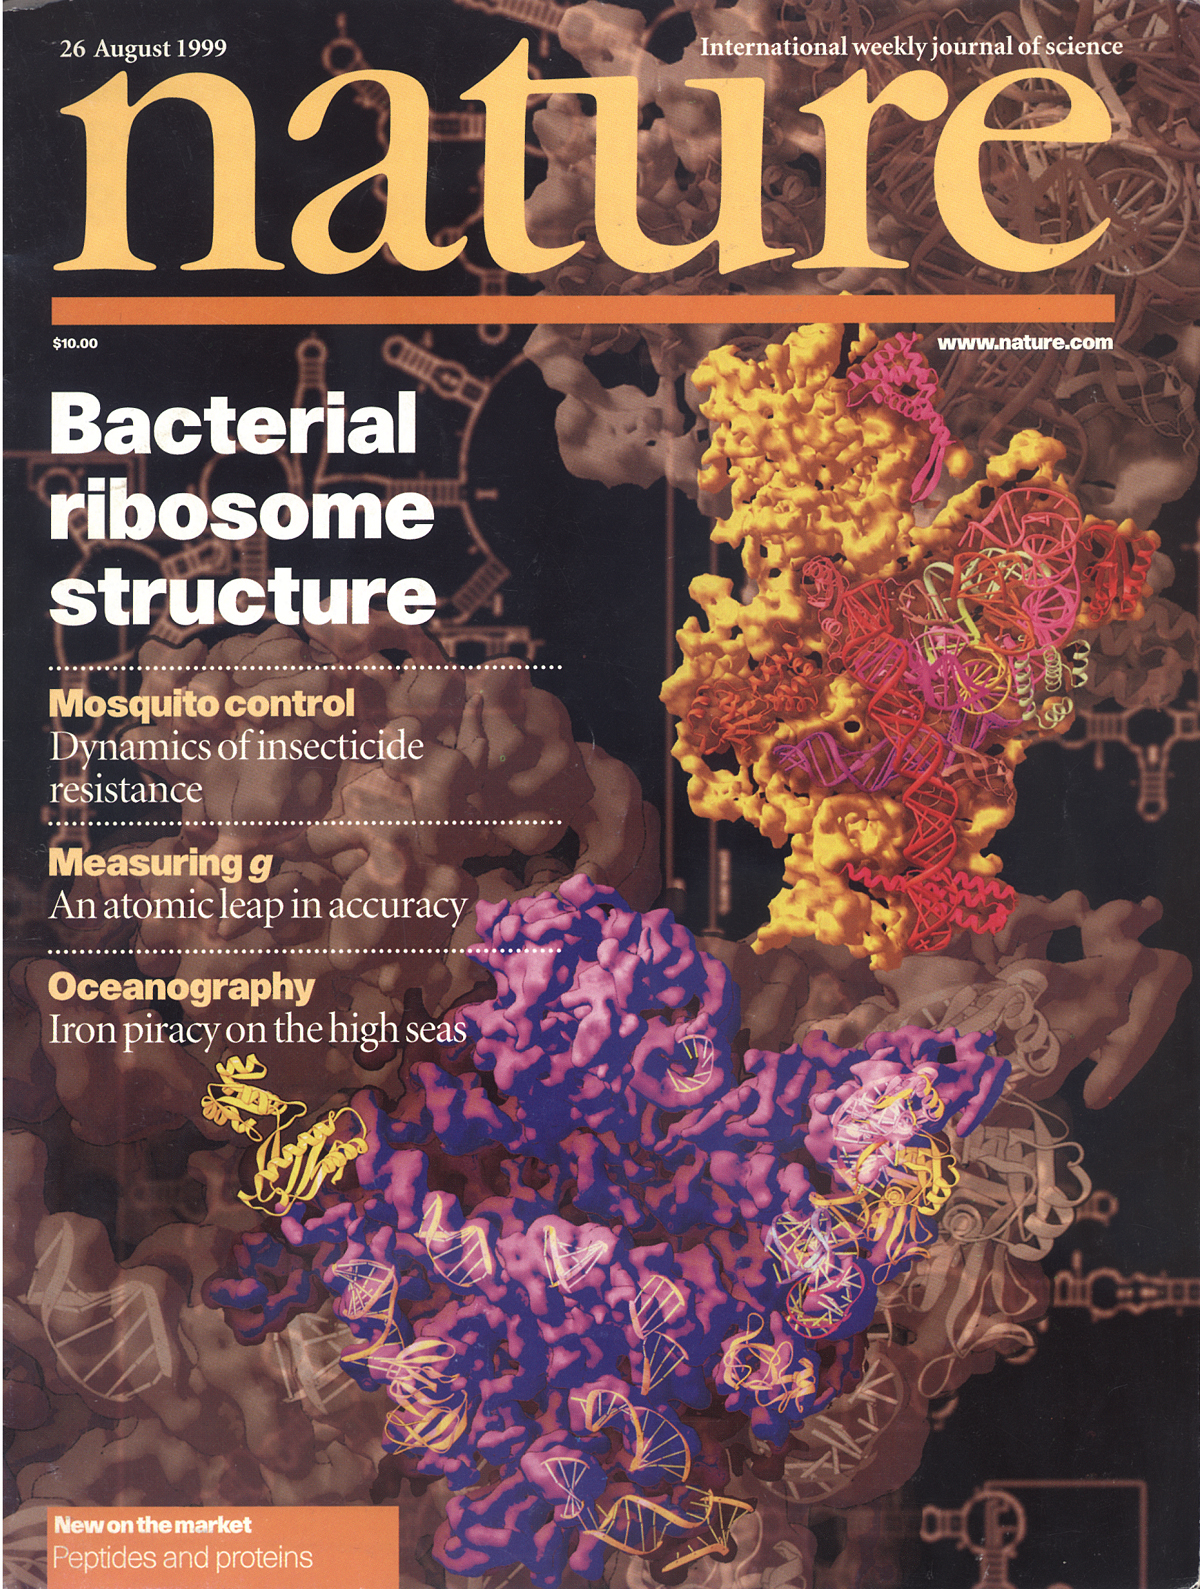 A cover of the journal Nature